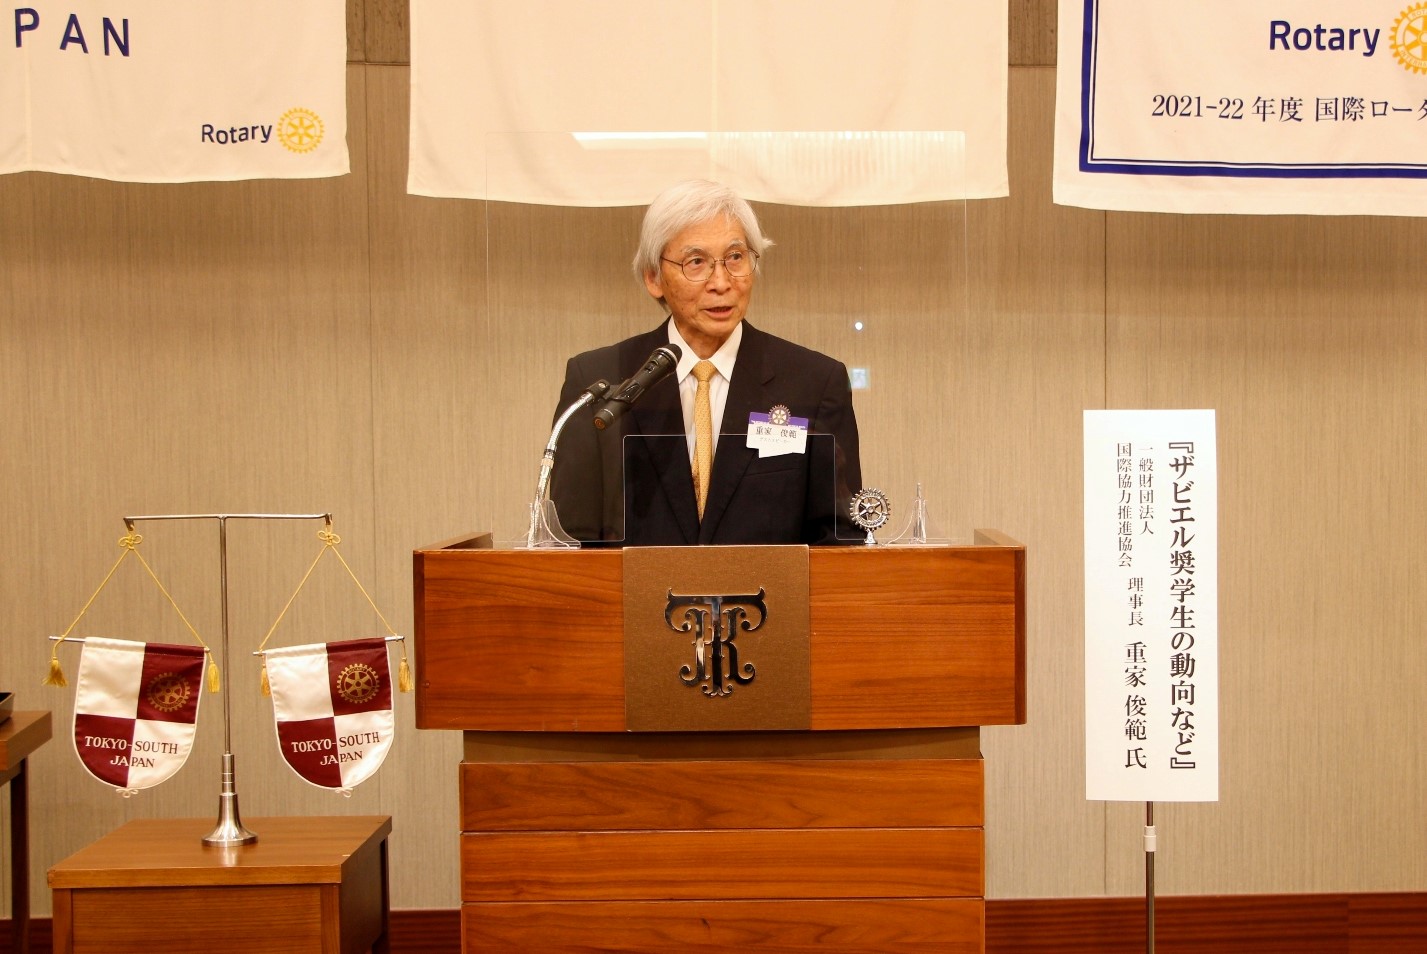 APIC President Shigeie gives Speech to Rotary Club of South Tokyo